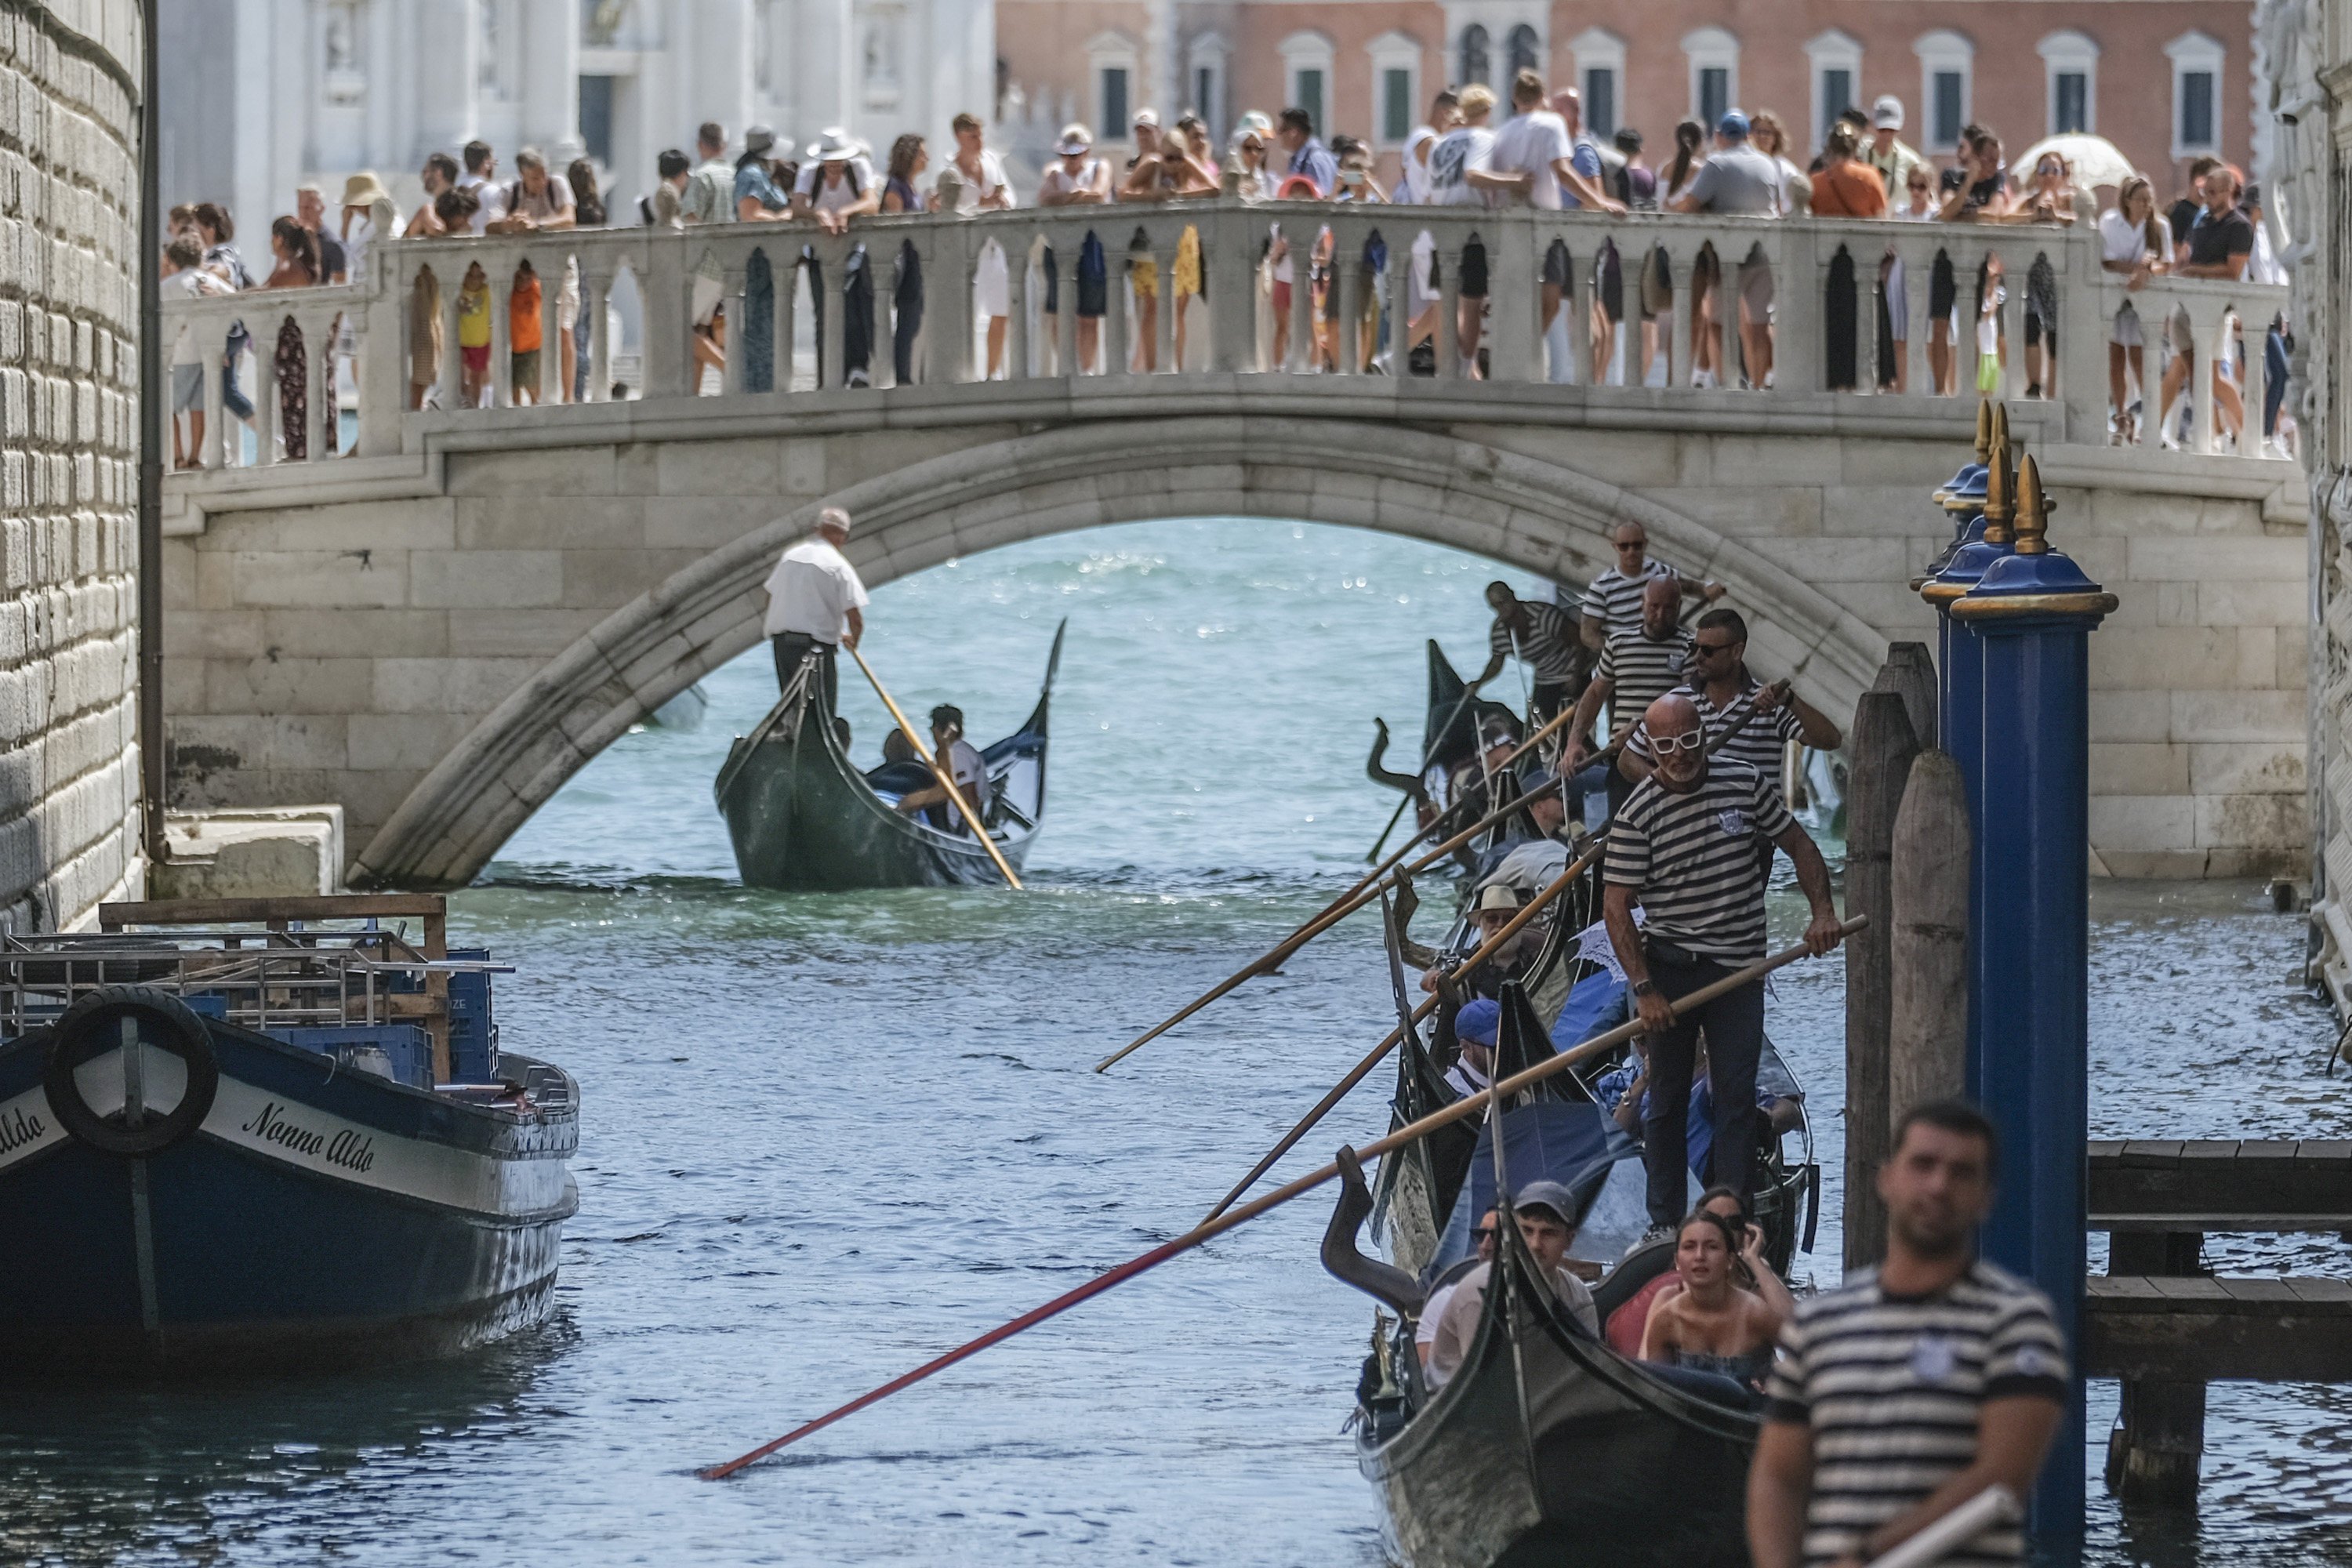 Gondoliers proceed slowly near the crowded Sospiri Bridge close to St Mark’s Square in Venice because of heavy water traffic. The city this week began charging day-trippers for entry, the latest measure by a European tourist destination to try to control visitor numbers. Photo: Getty Images